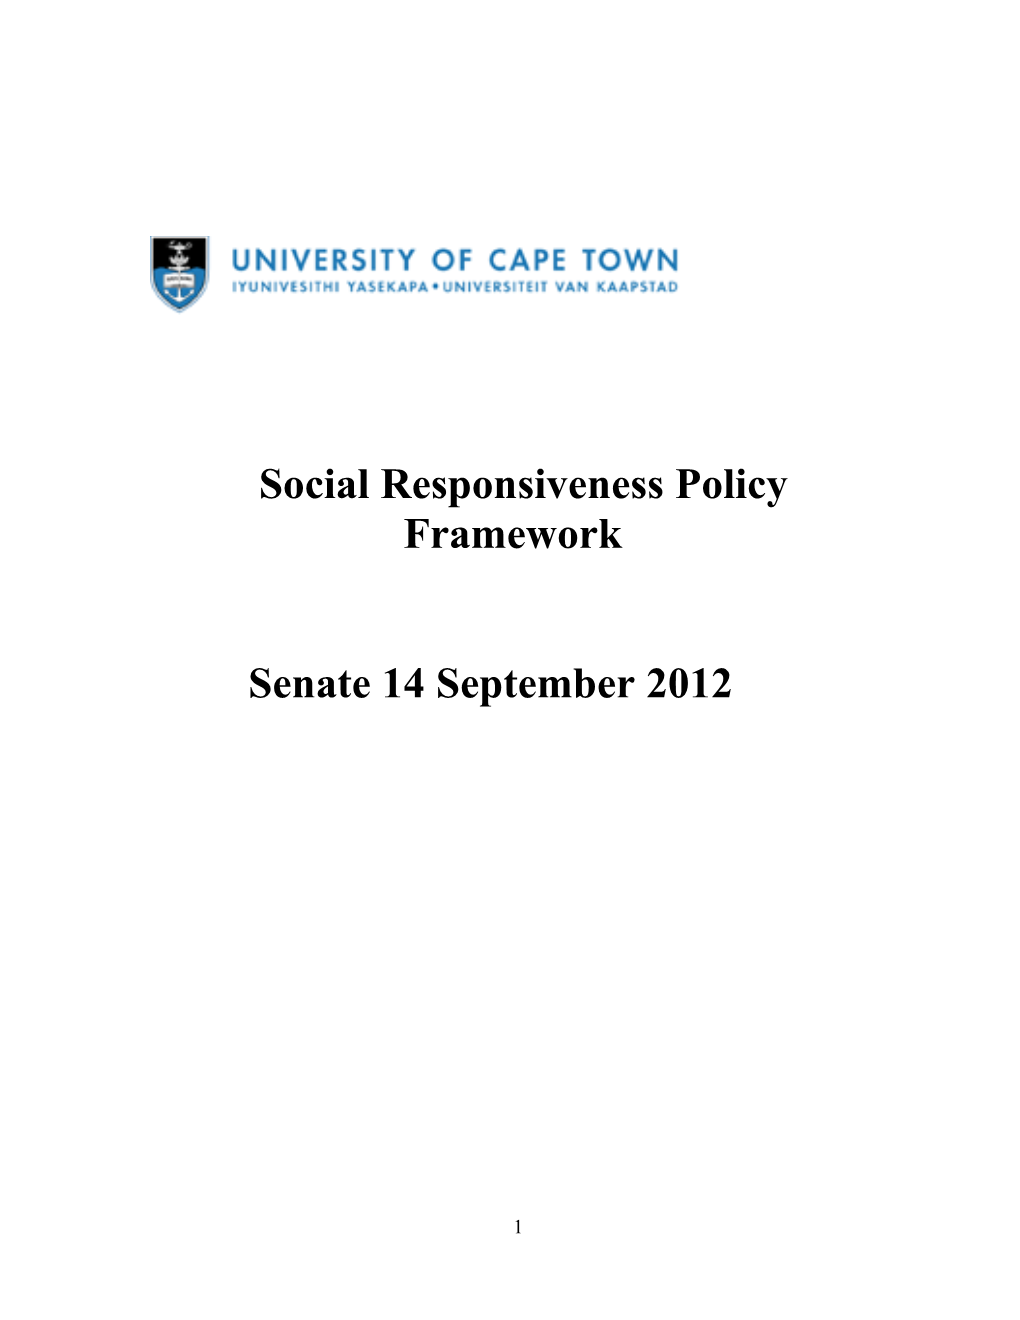 Proposed Framework for Developing an Institution Wide Policy Framework for Social Responsiveness